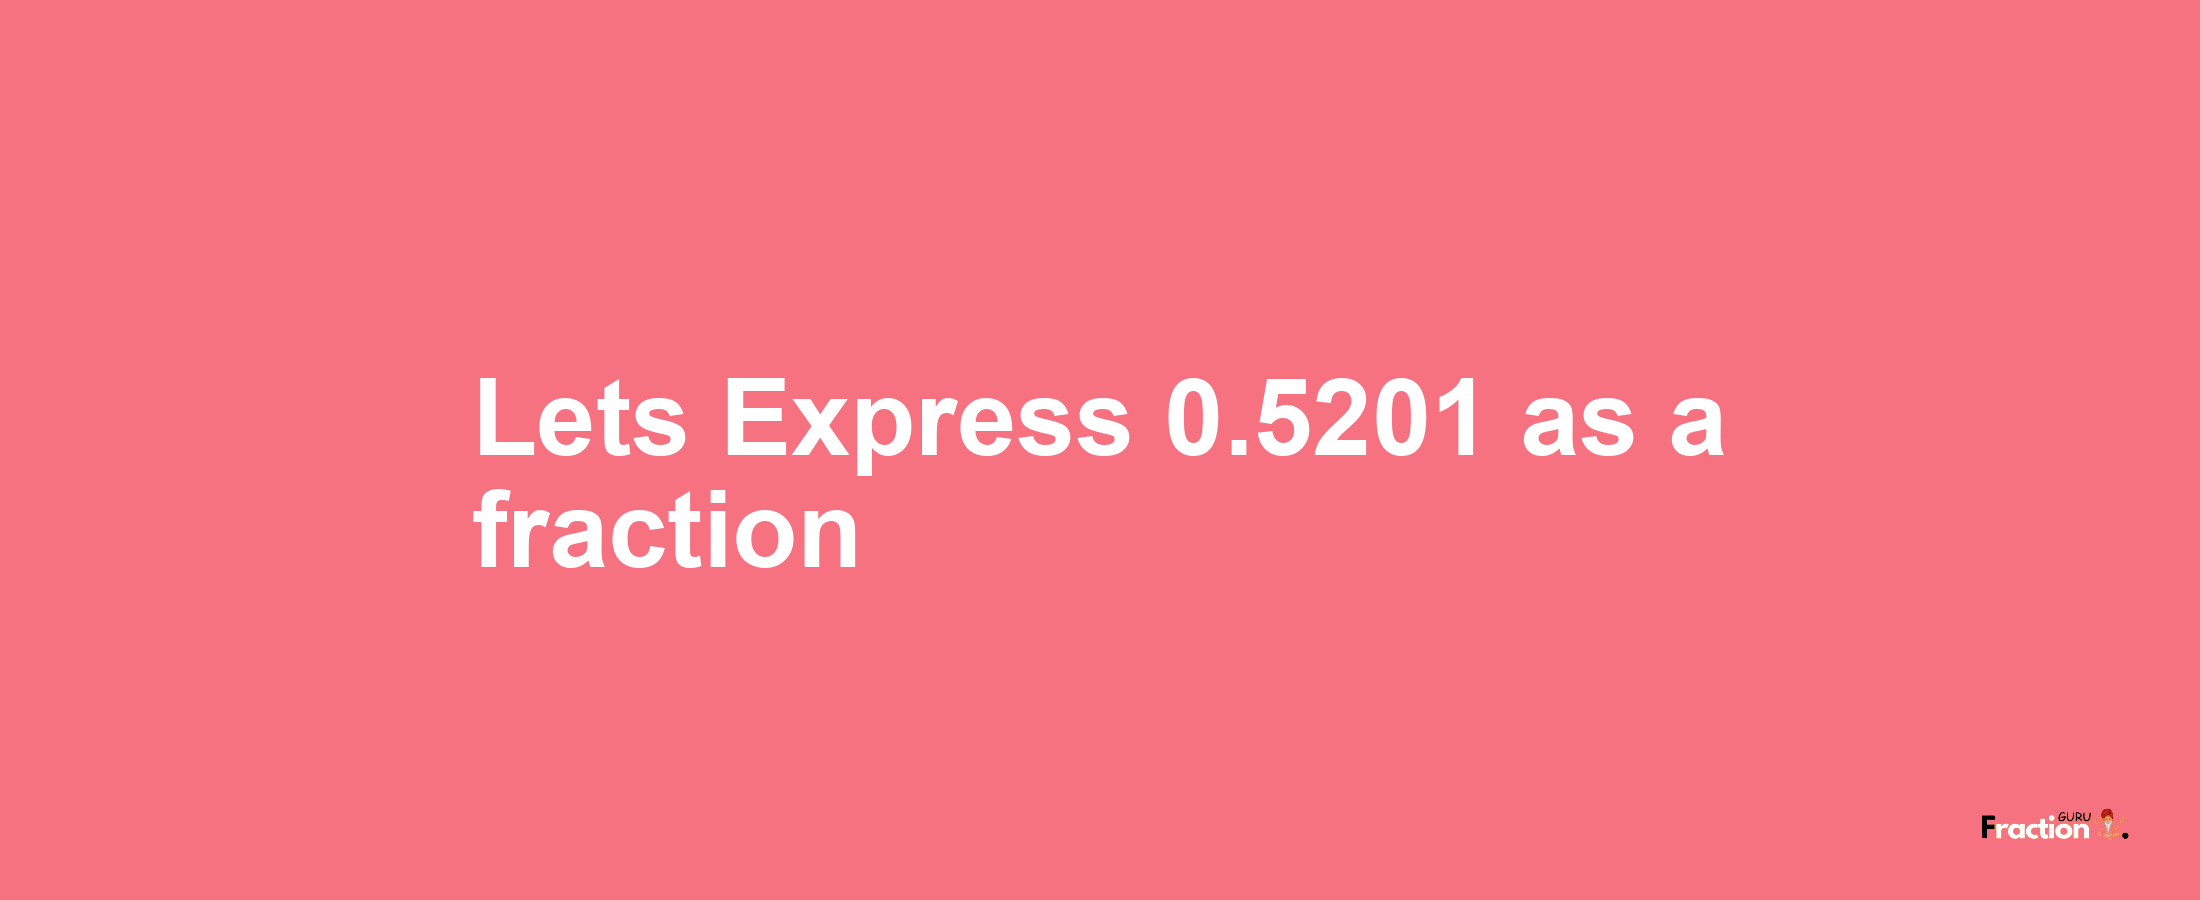 Lets Express 0.5201 as afraction